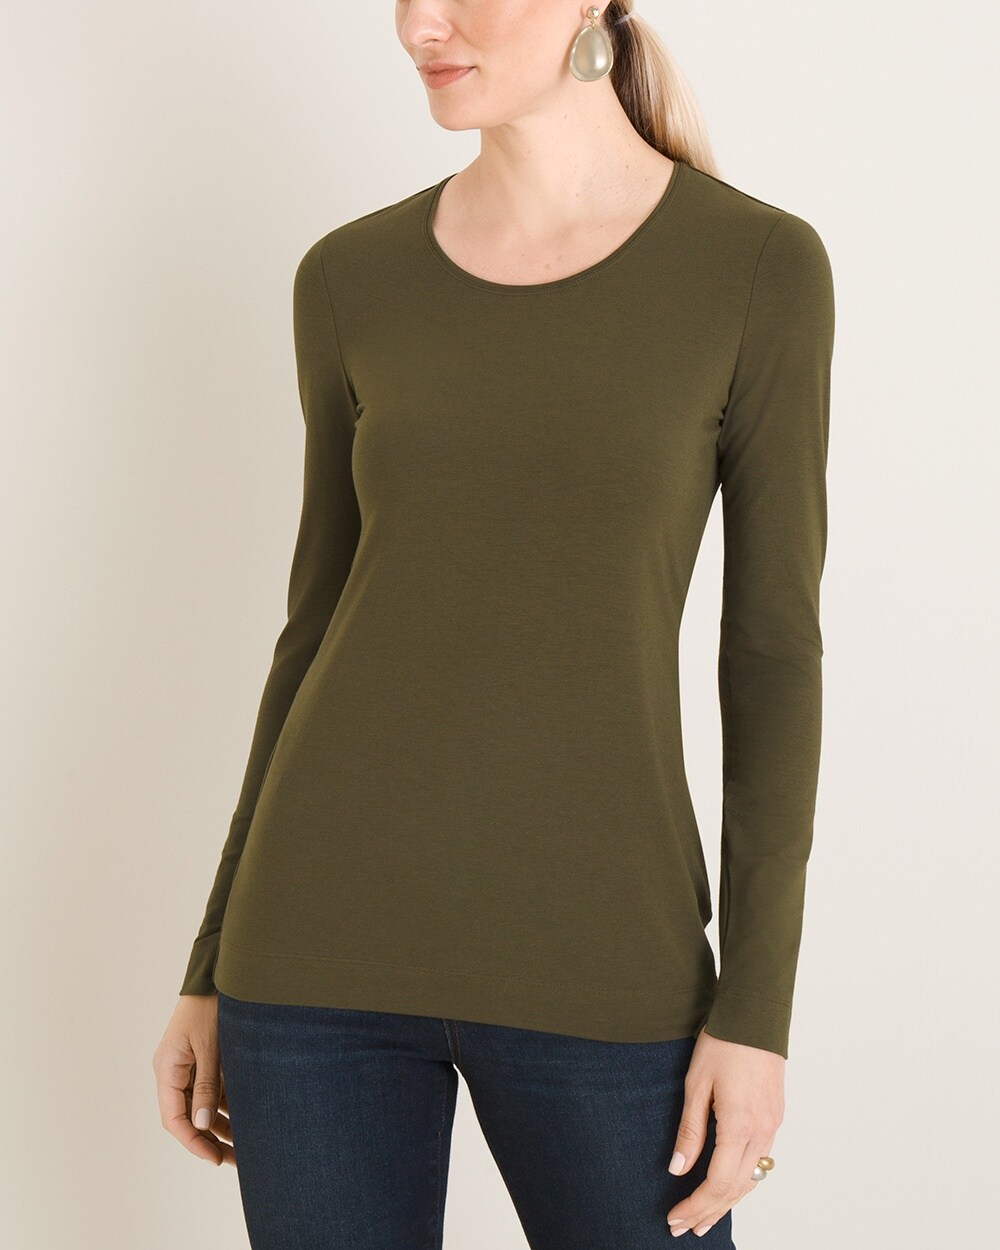 Touch of Cool Long-Sleeve Layering Tee - Chico's